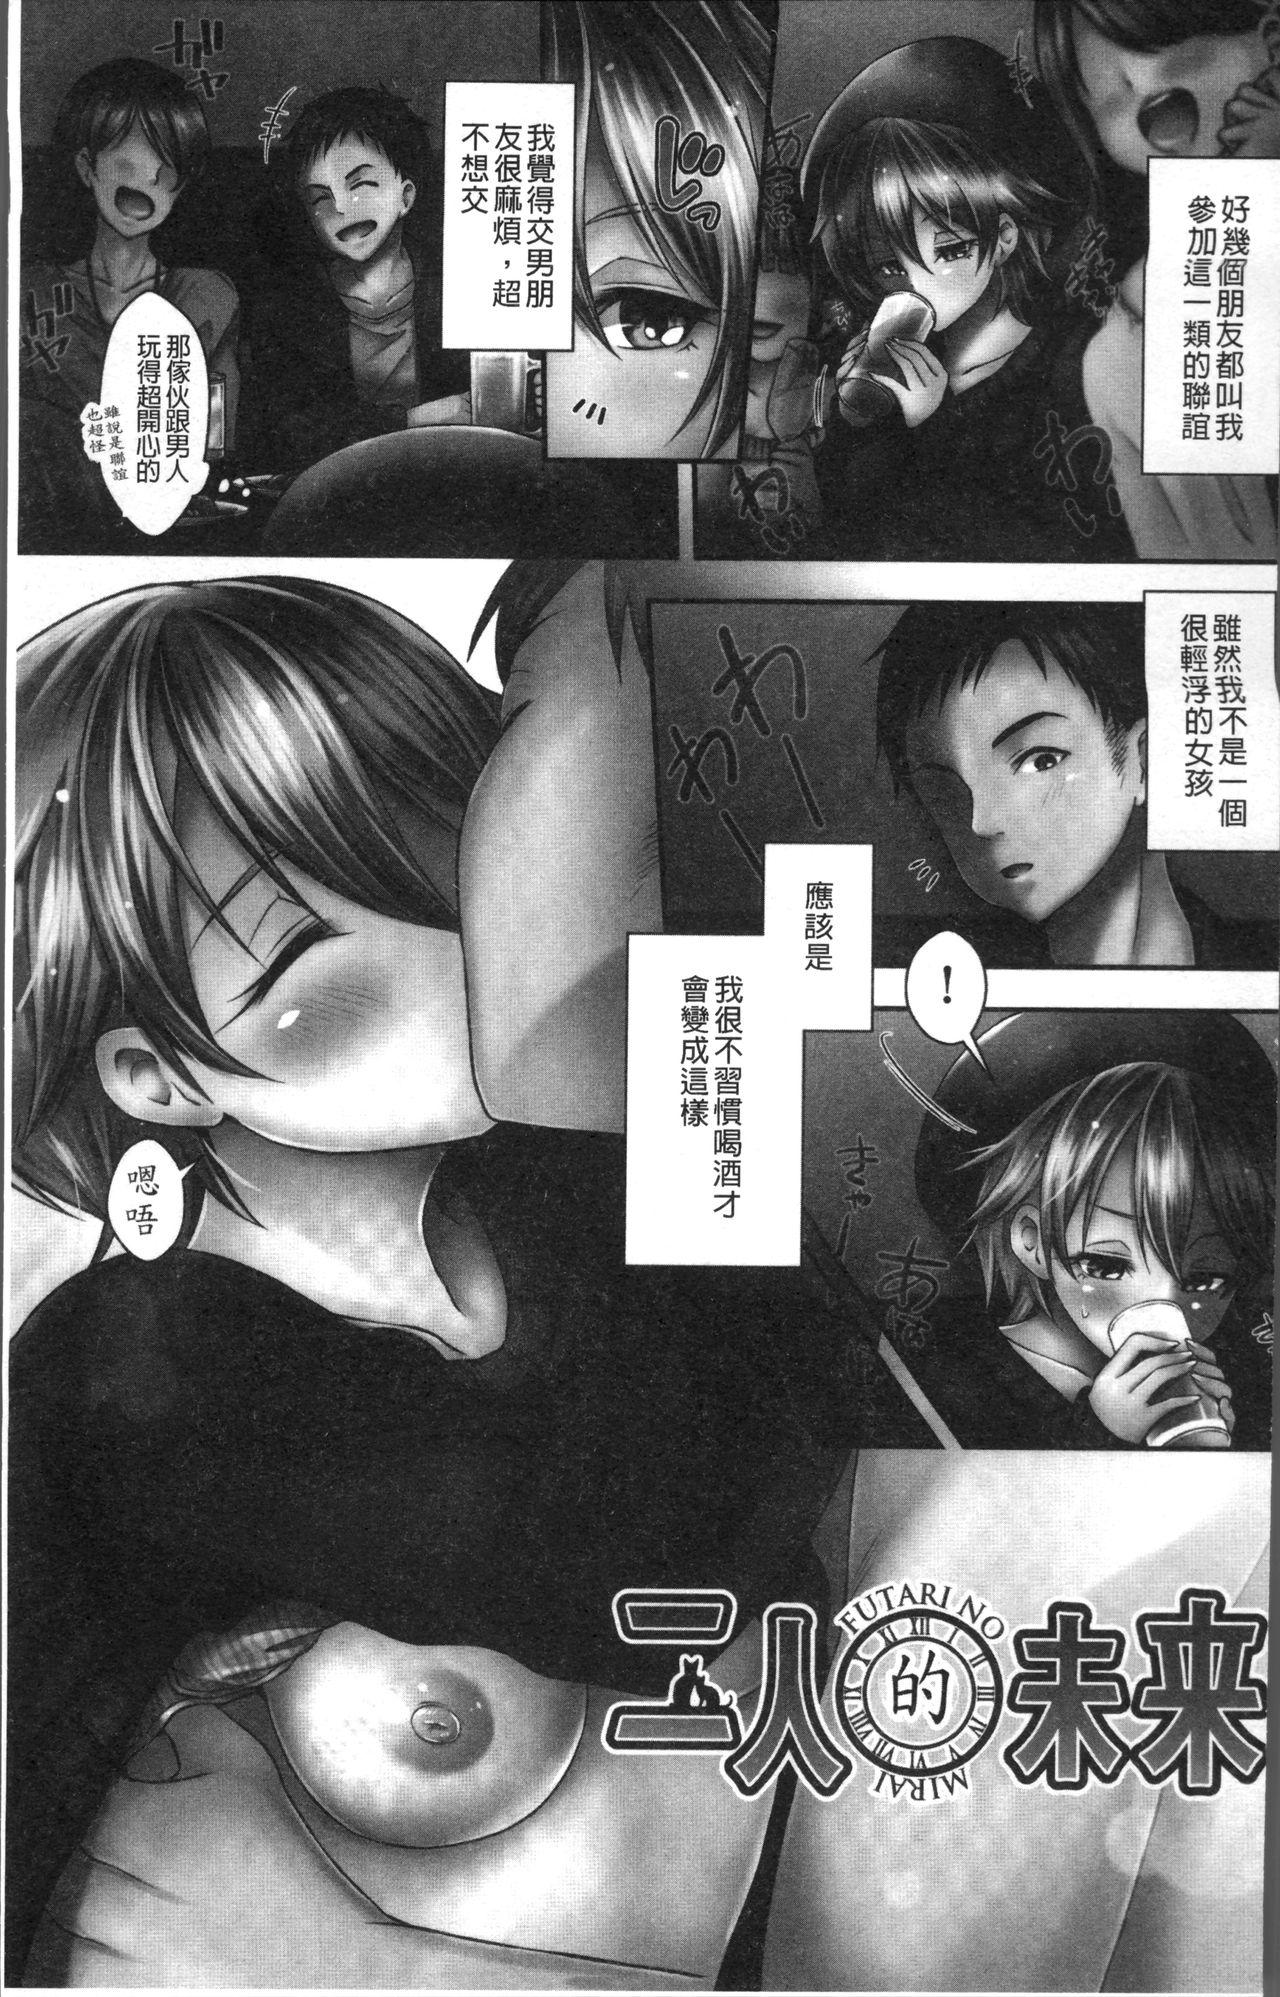 Pounded HoneMemo - Honey Memorial | 香甜記憶 Cei - Page 6